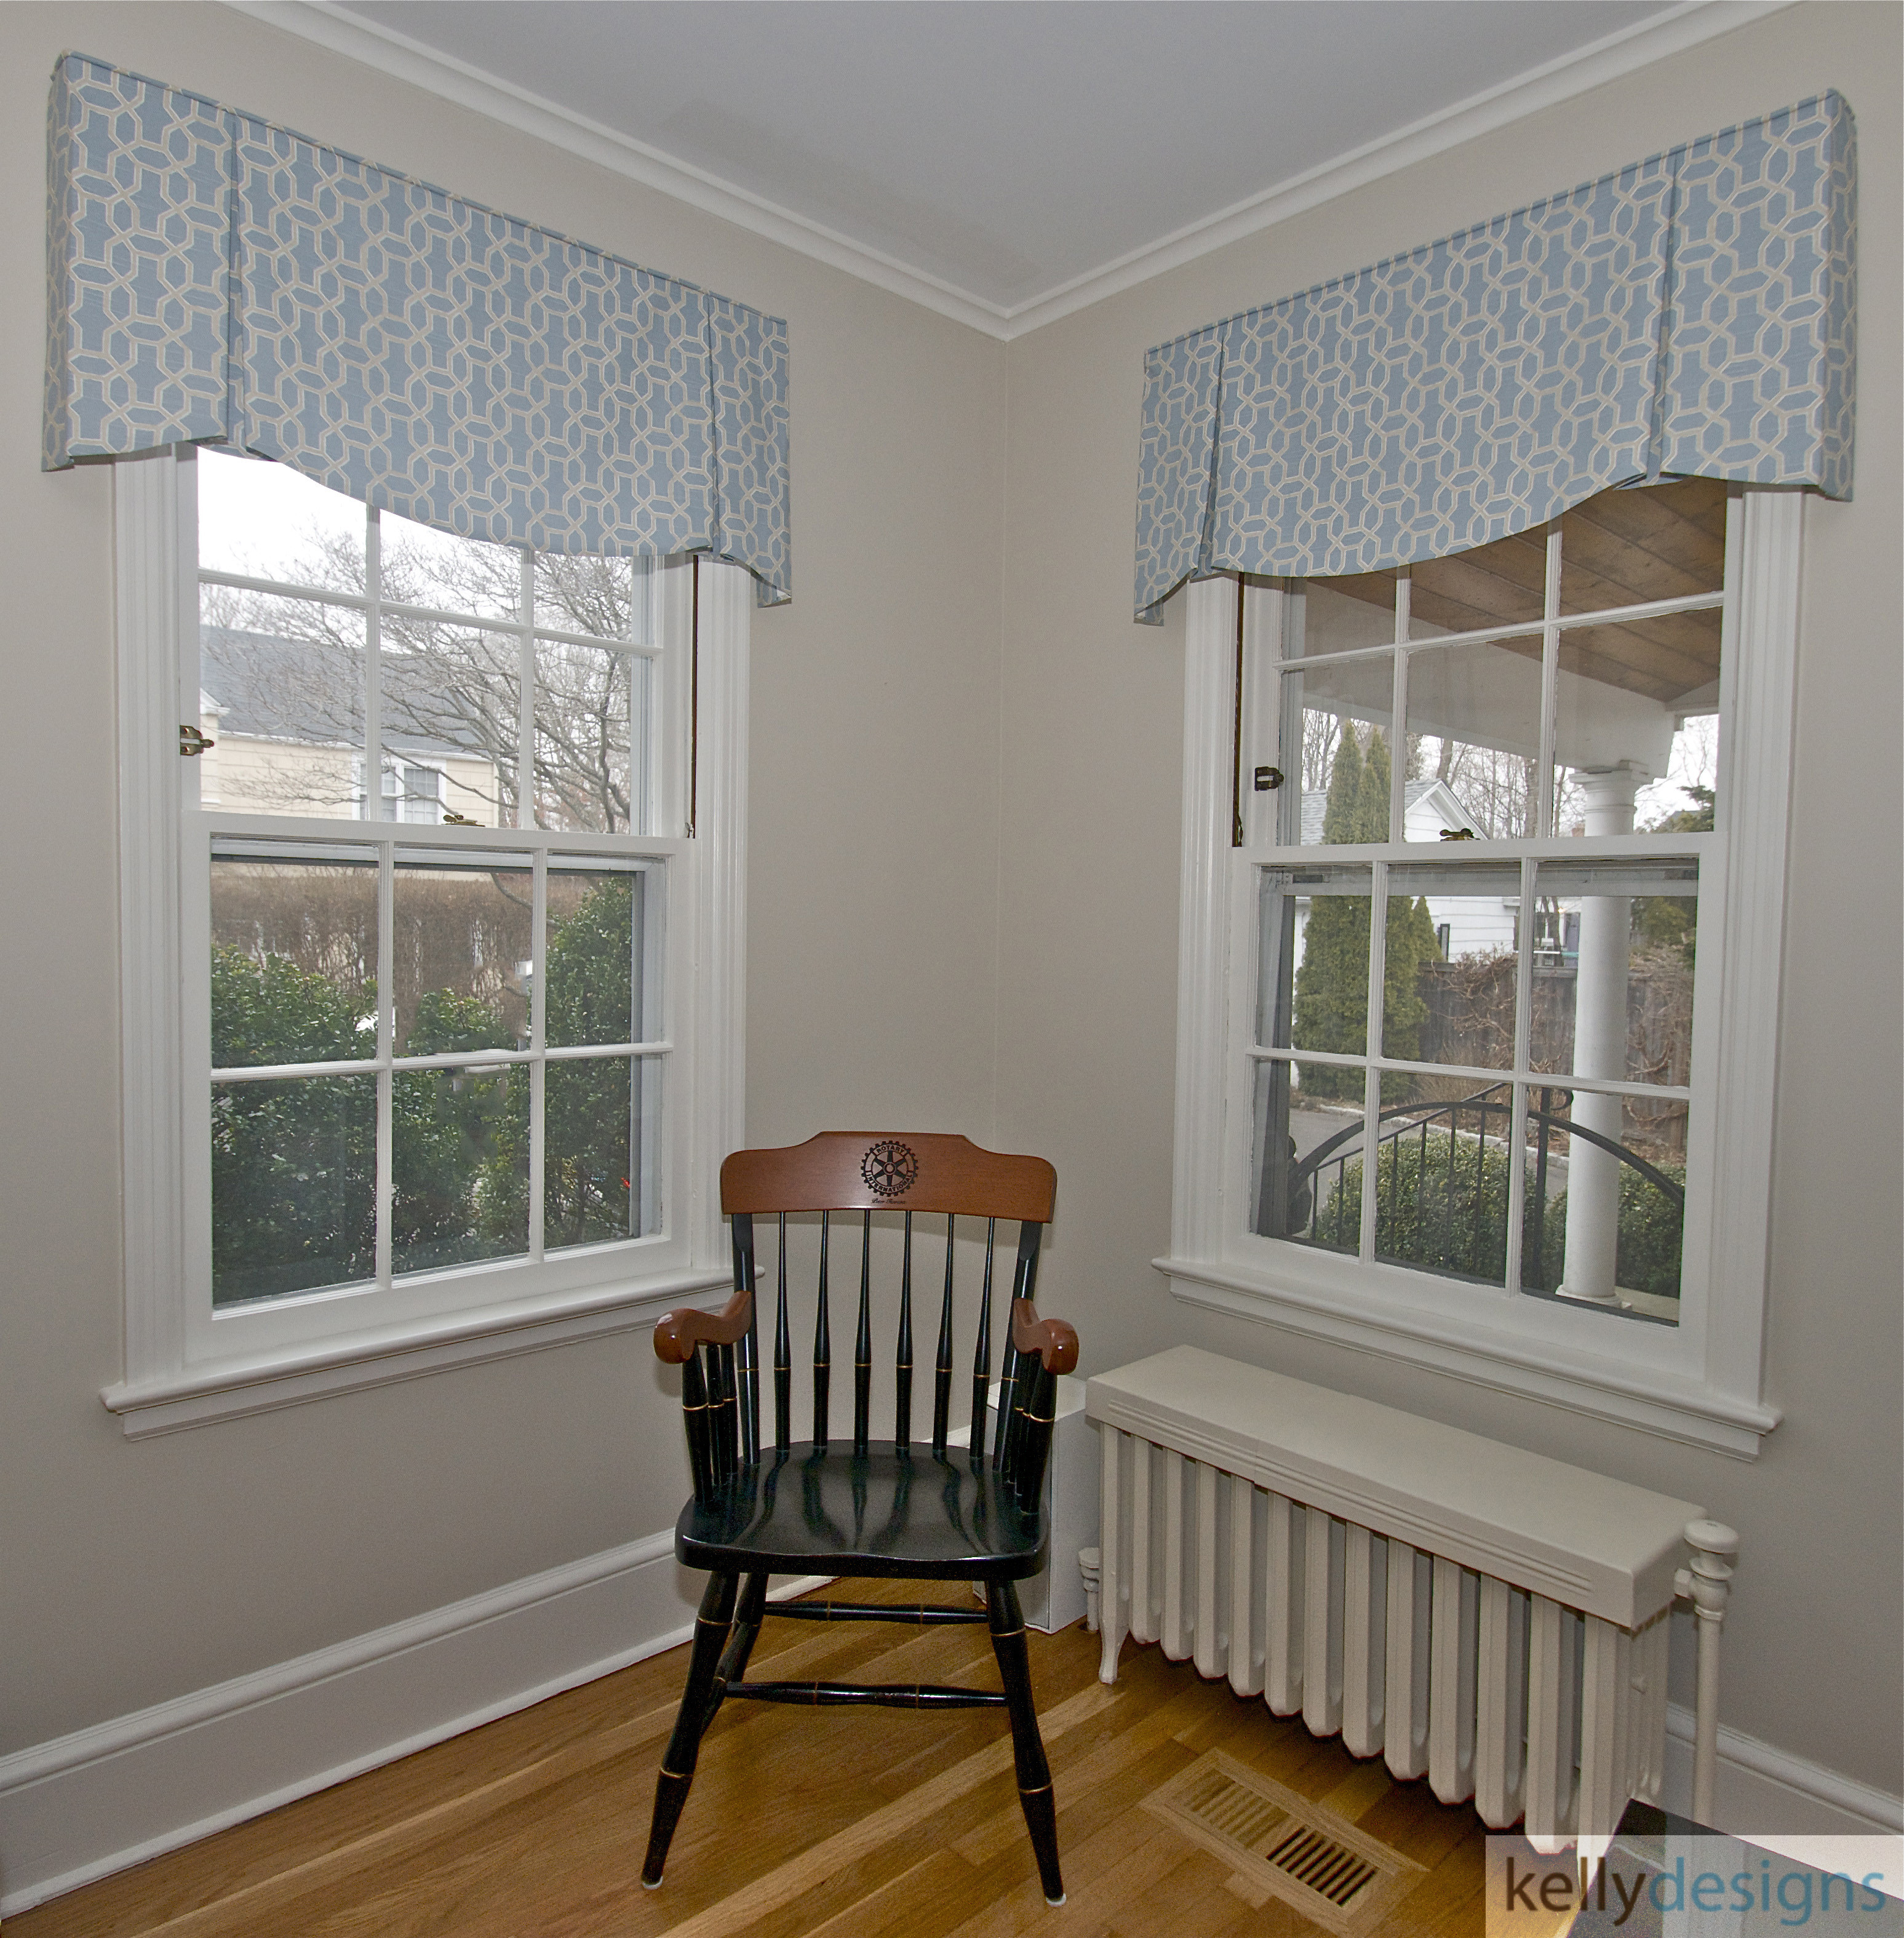 Stunning On Sturges   Window Treatments    Interior Design By Kellydesigns